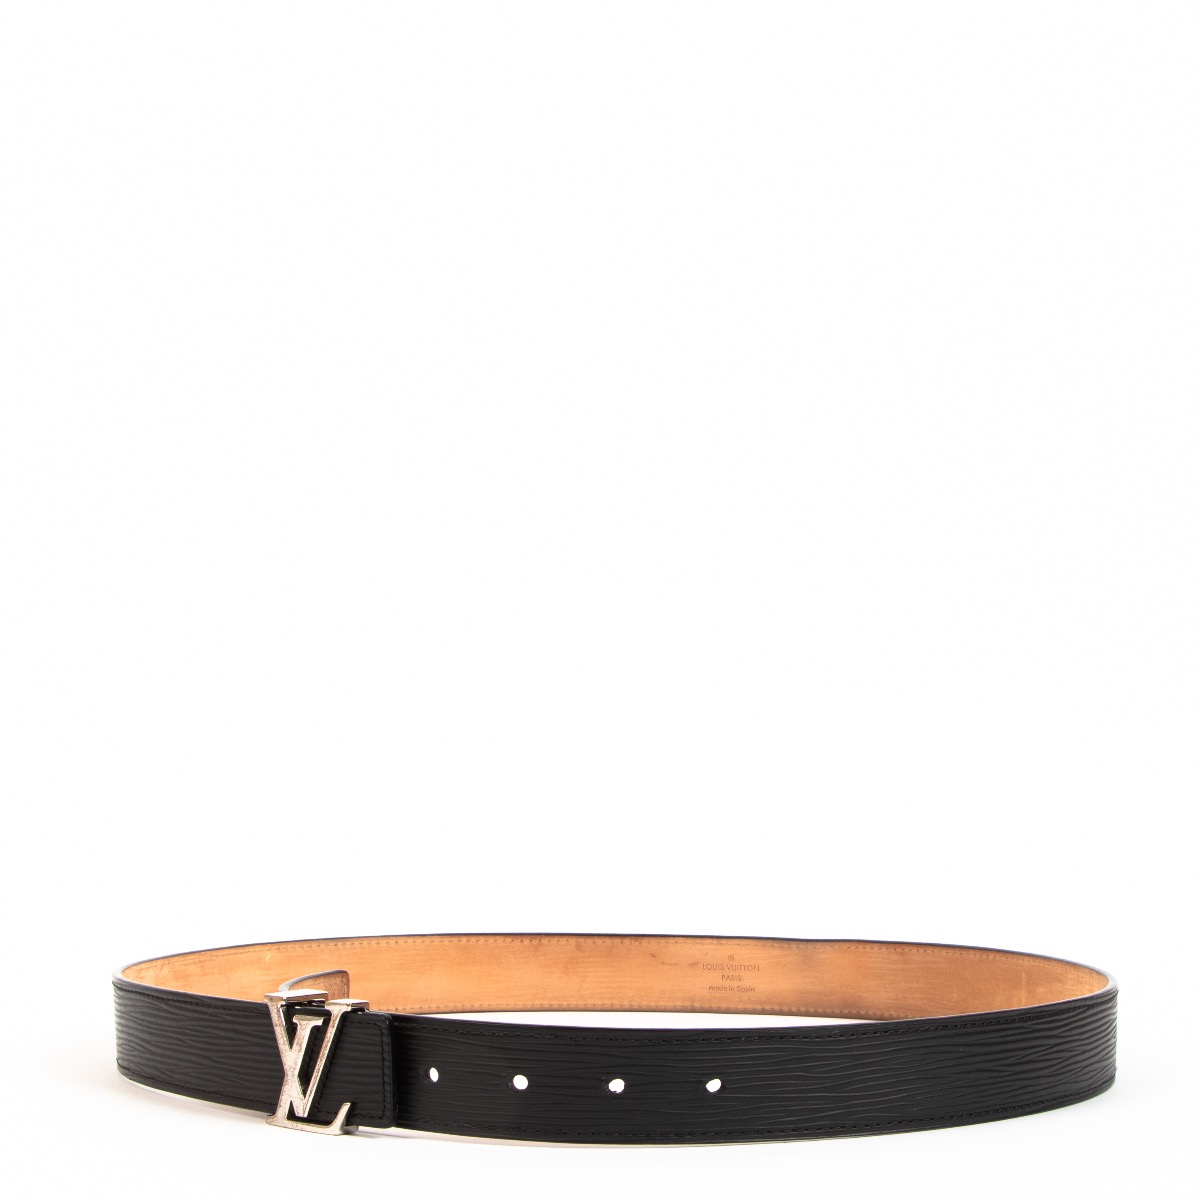 Initiales leather belt Louis Vuitton Black size XL International in Leather  - 34509593